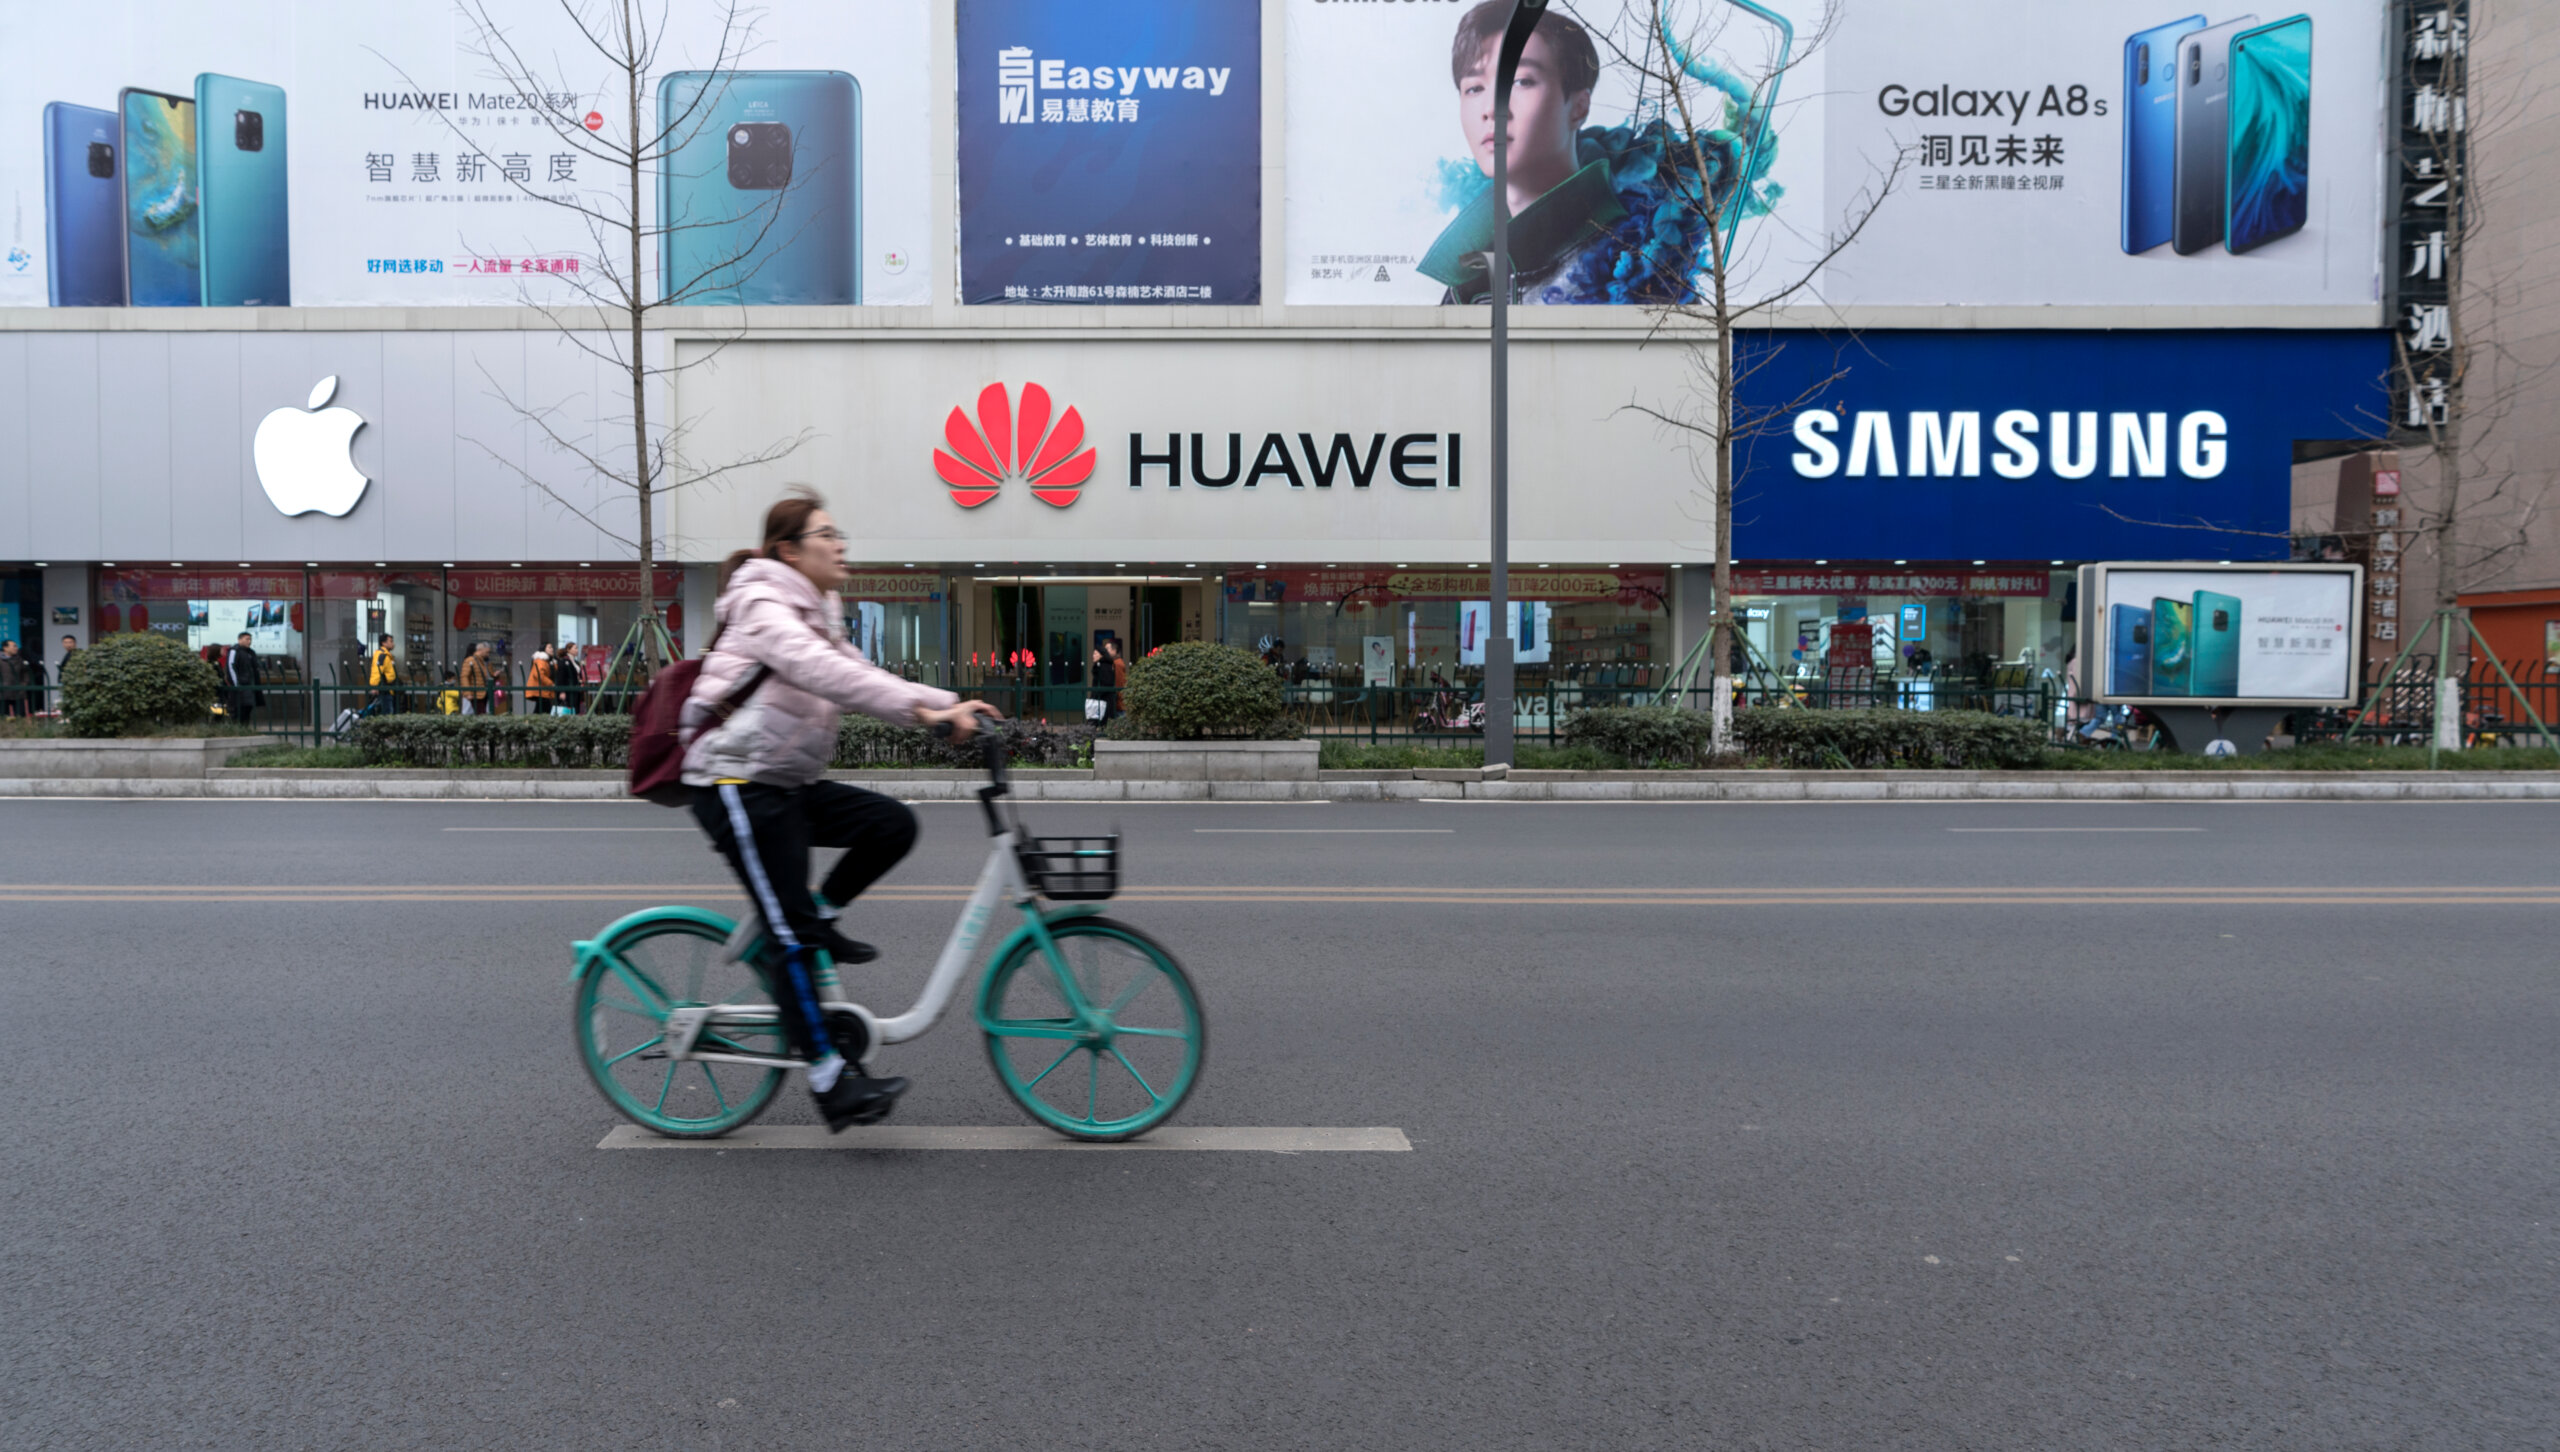 Huawei is likely plotting a return to the 5G smartphone industry by the end of this year.